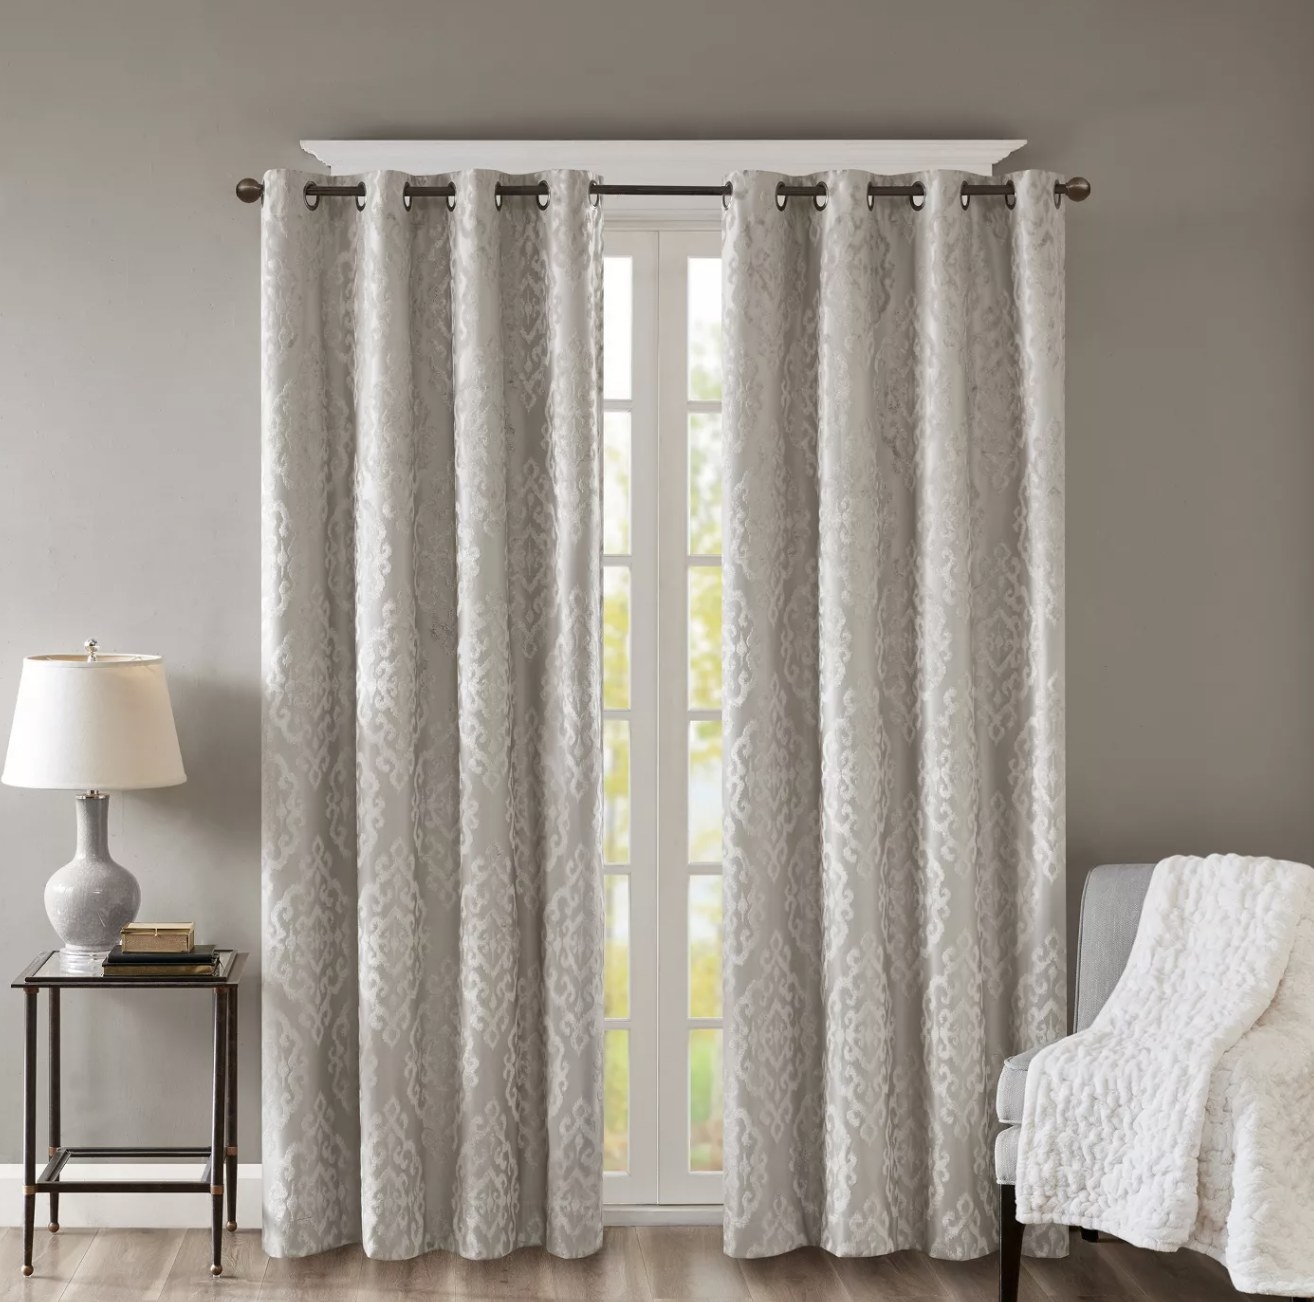 a set of gray and white jacquard print blackout curtains in a room